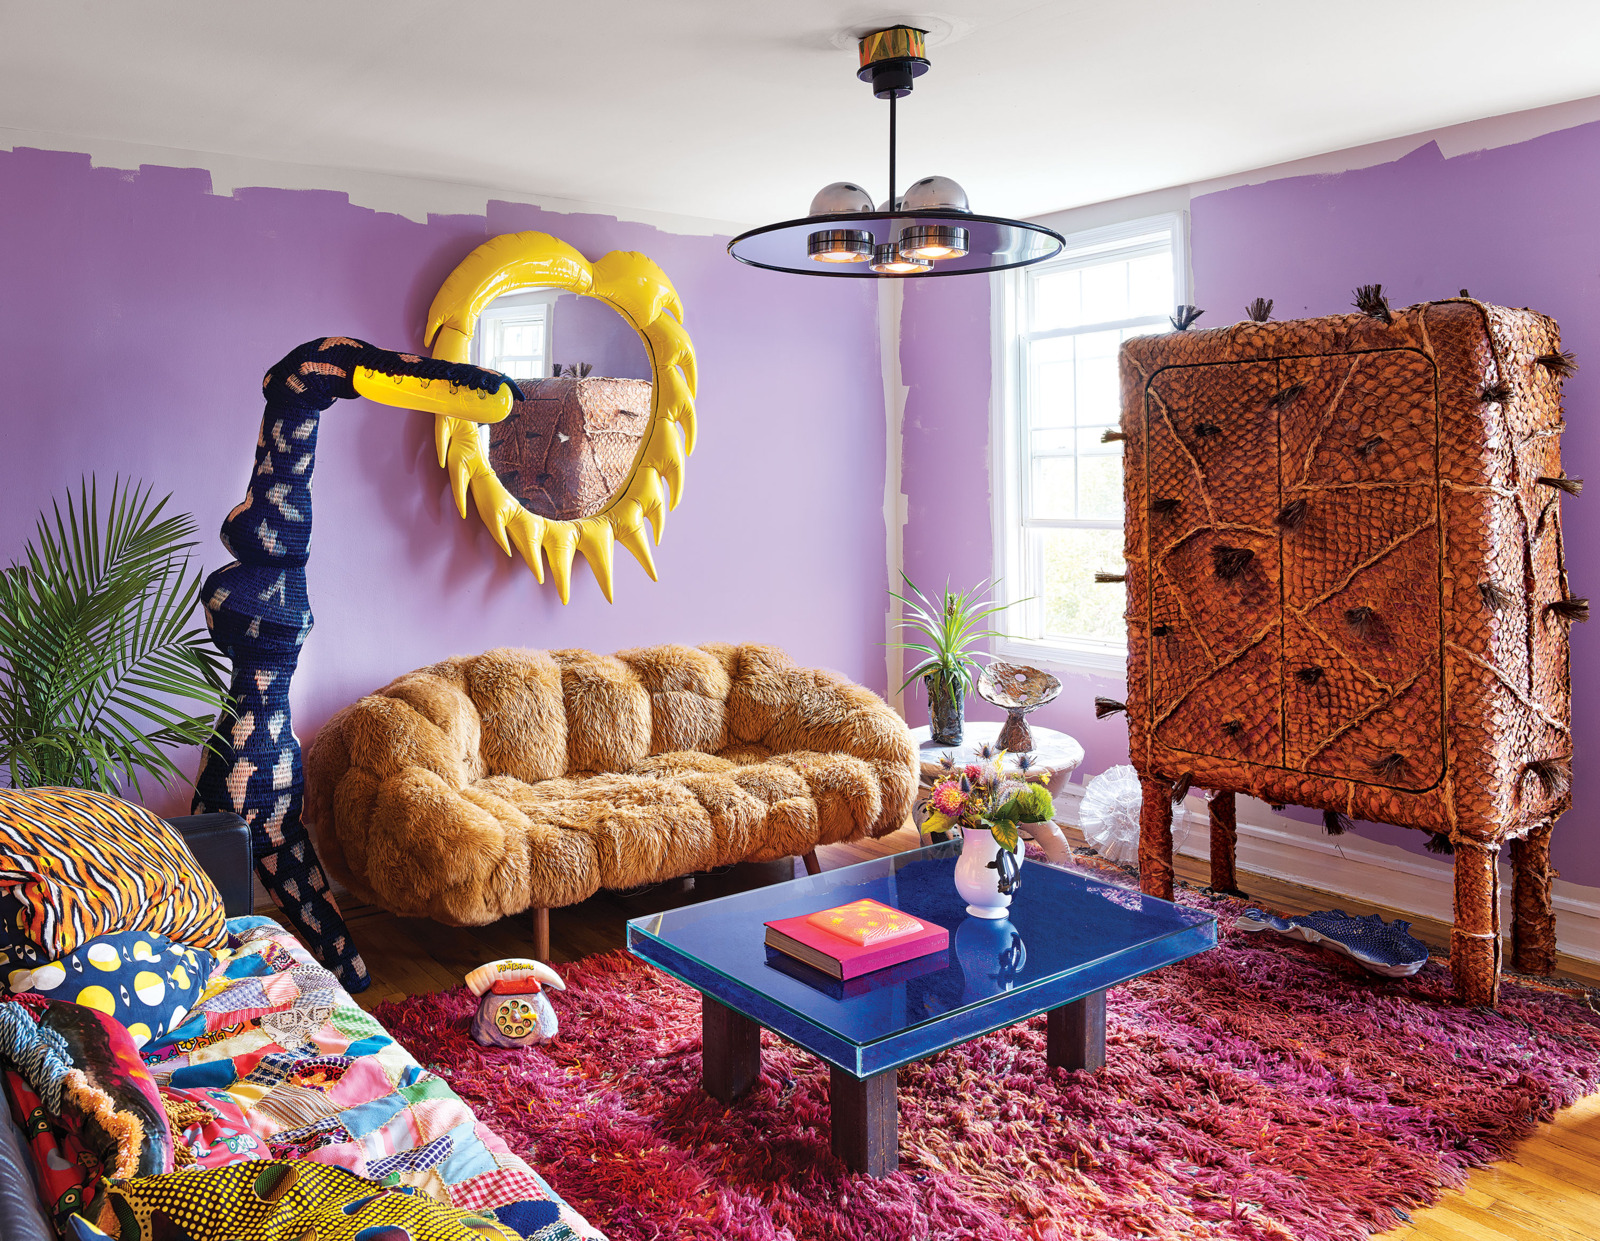 This colorful home is pure craziness, full of colors, bold designs, unusual furniture and accessories